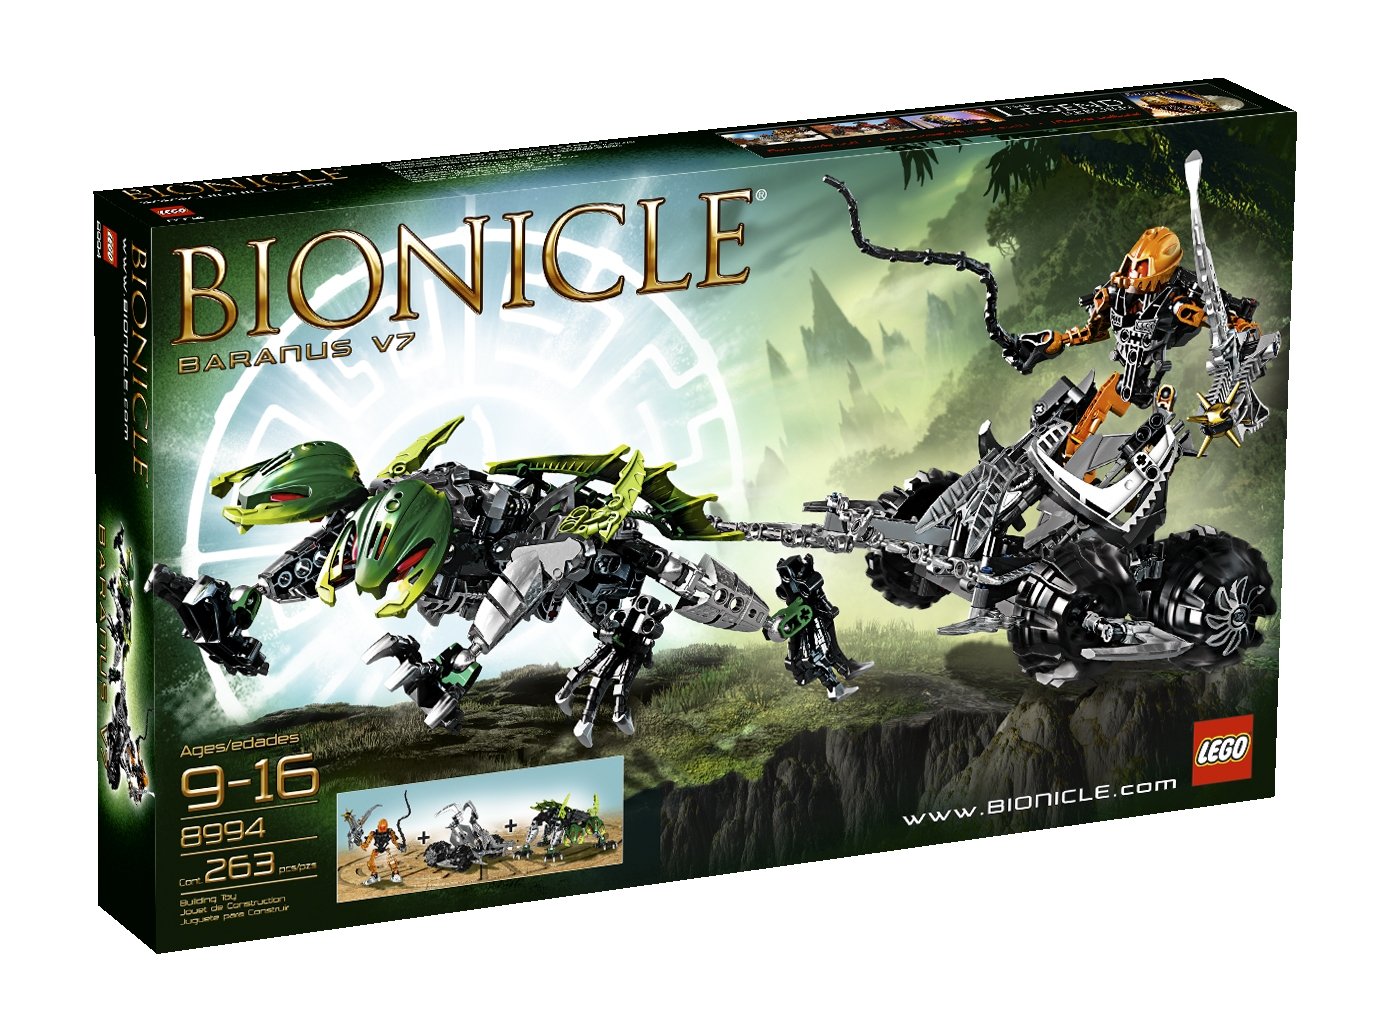 15 Best Lego BIONICLE Sets 2022 - Buying Guide & Reviews 10